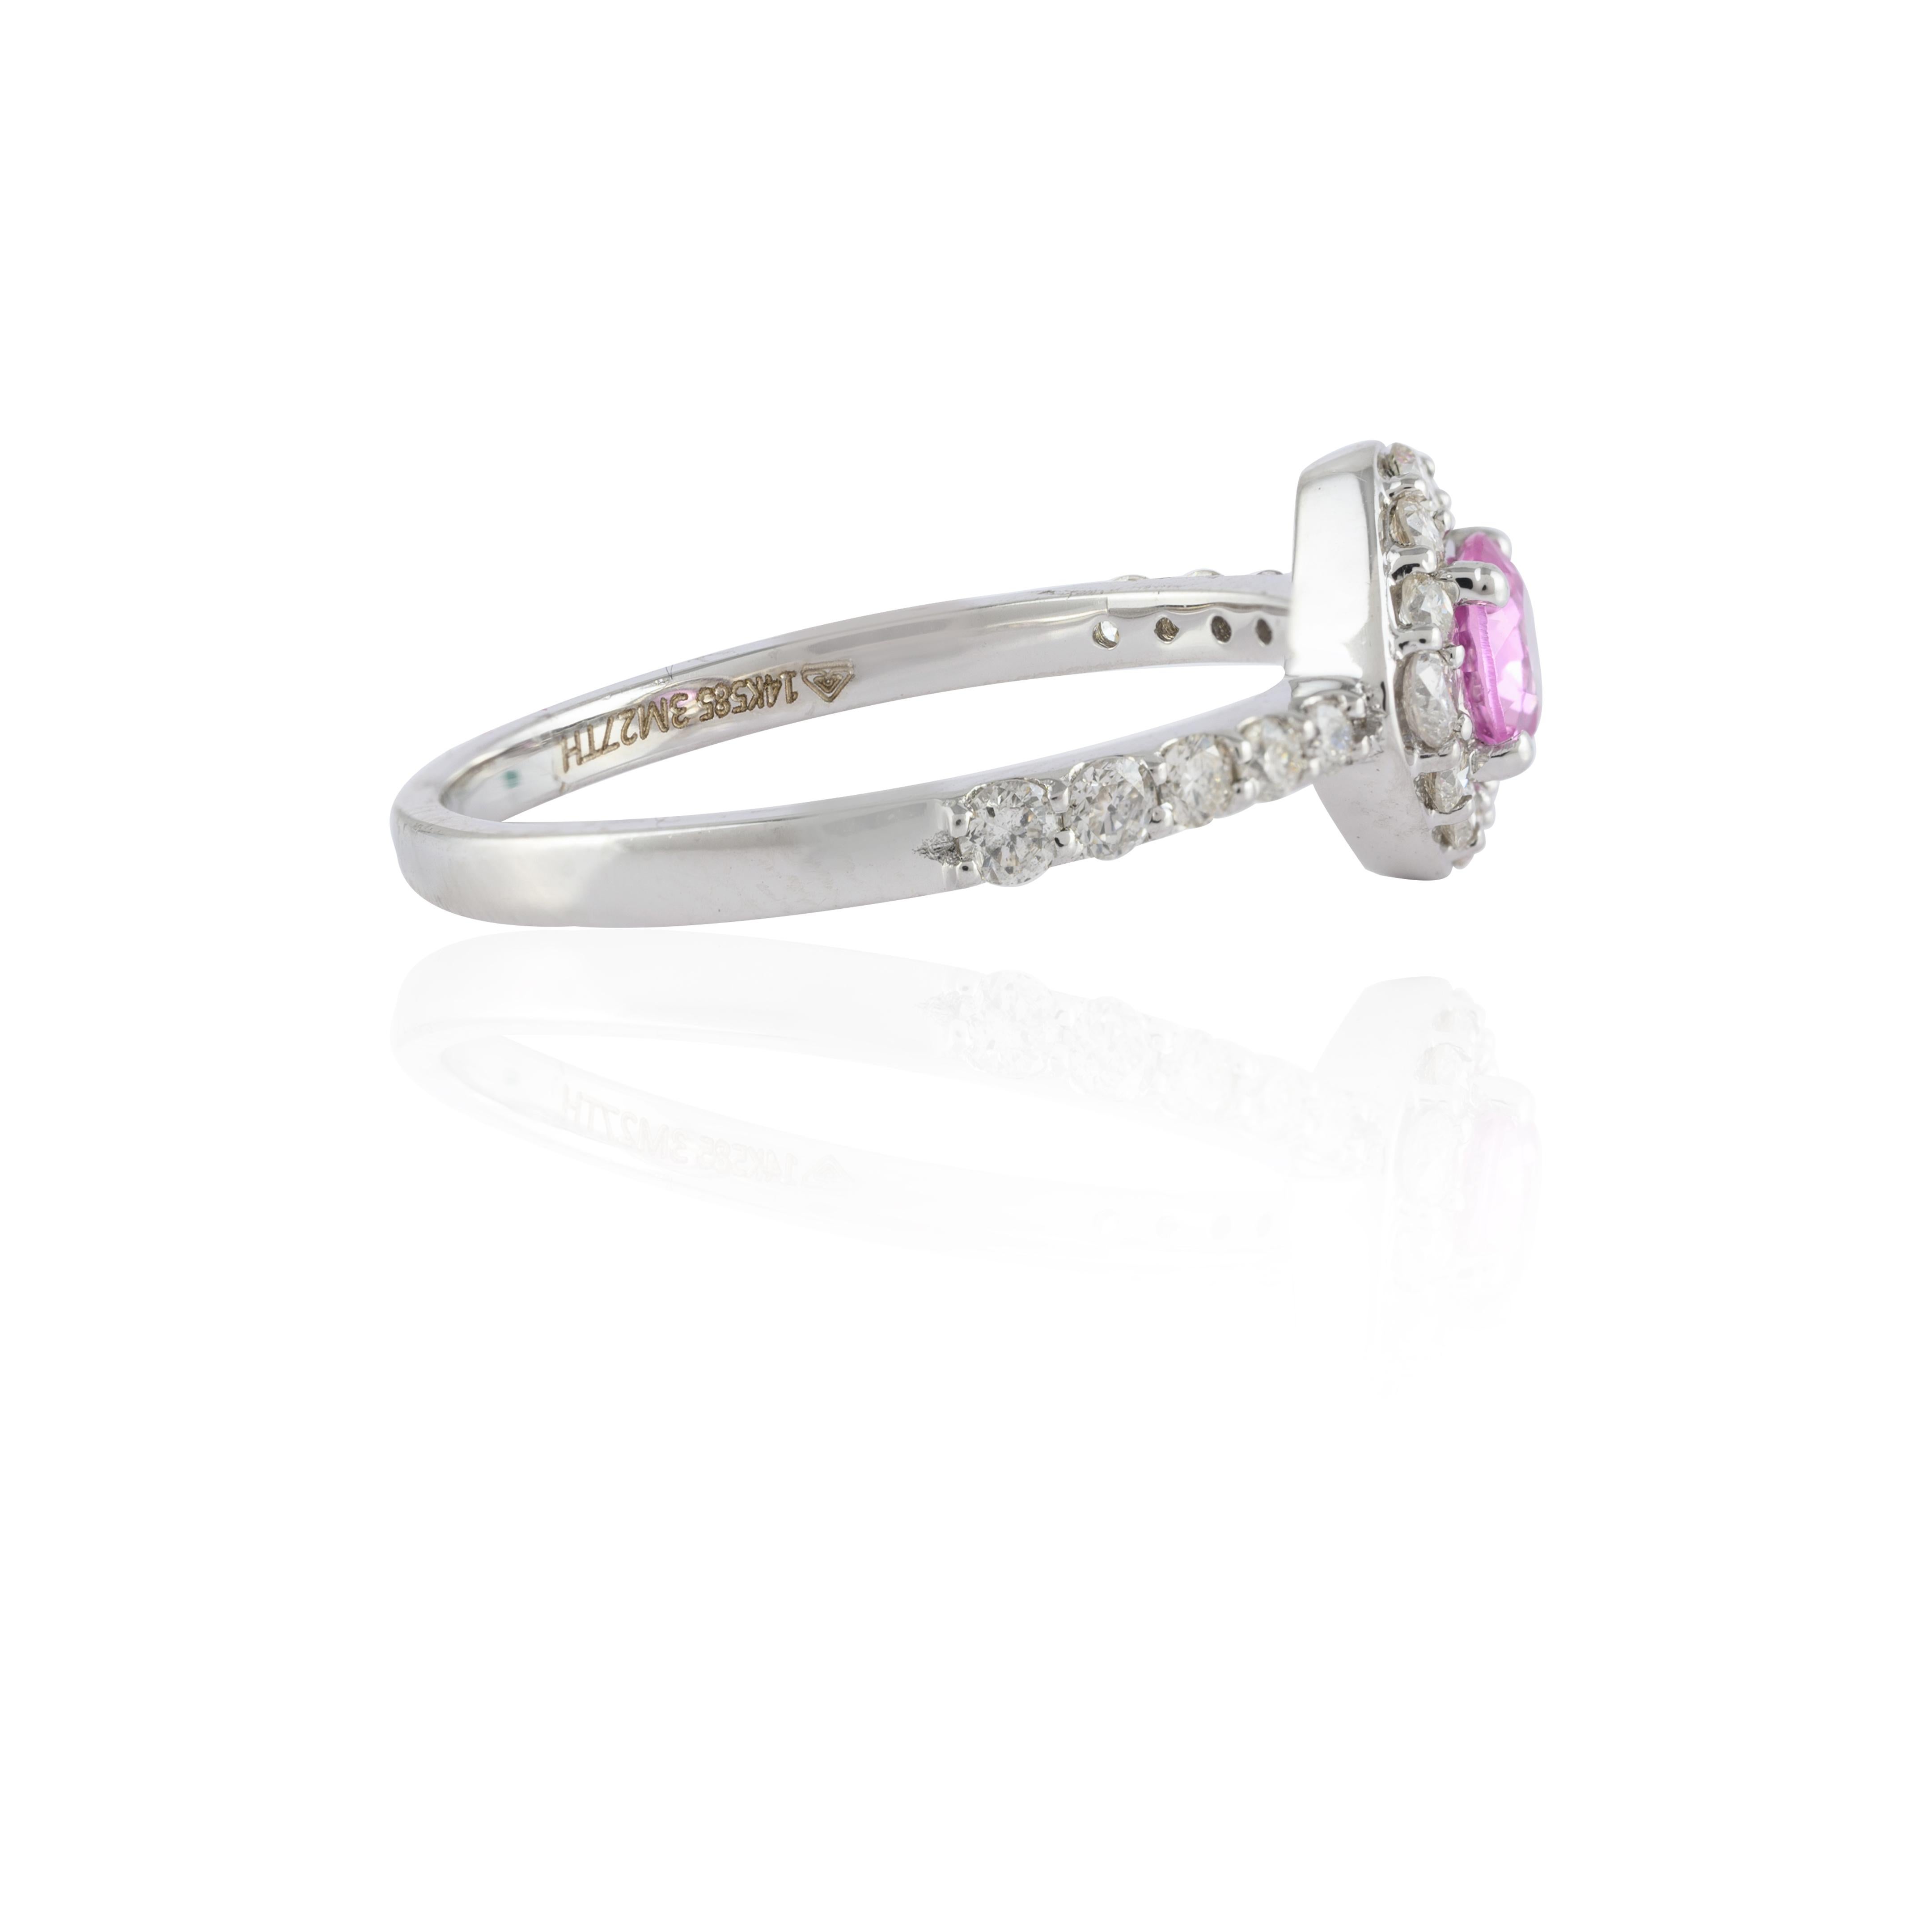 For Sale:  Minimal Halo Diamond and Pink Sapphire Ring Studded in 14k Solid White Gold 7